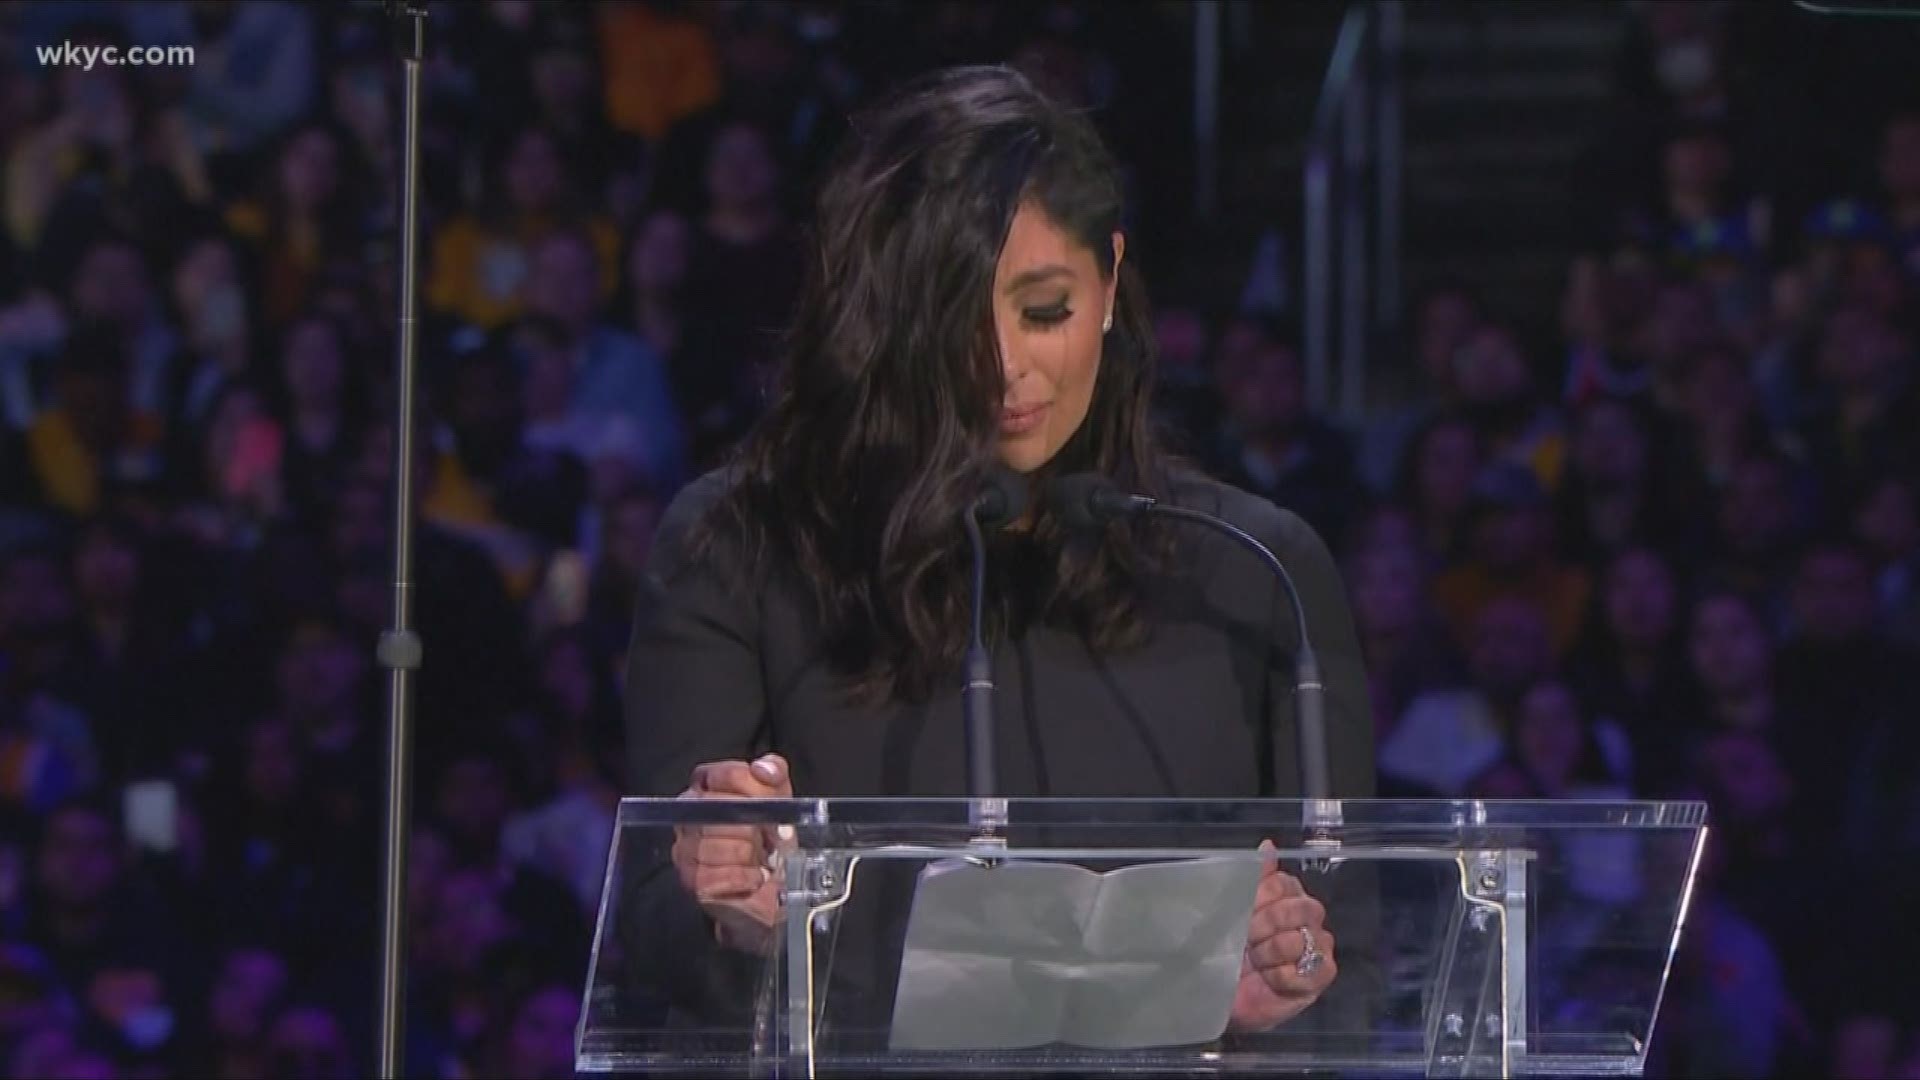 Vanessa Bryant, Kobe's widow and Gianna's mother, spoke on camera for the first time since the helicopter crash last month. She spoke on their bond.